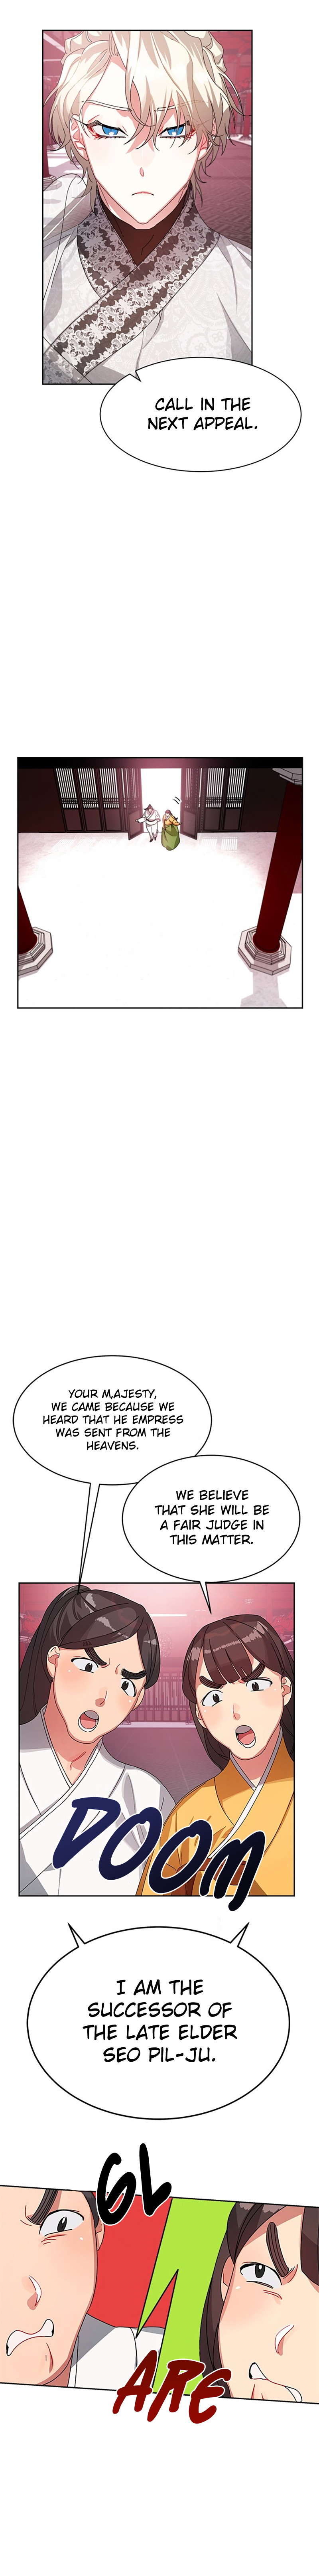 What Kind of Empress Is This ch.12